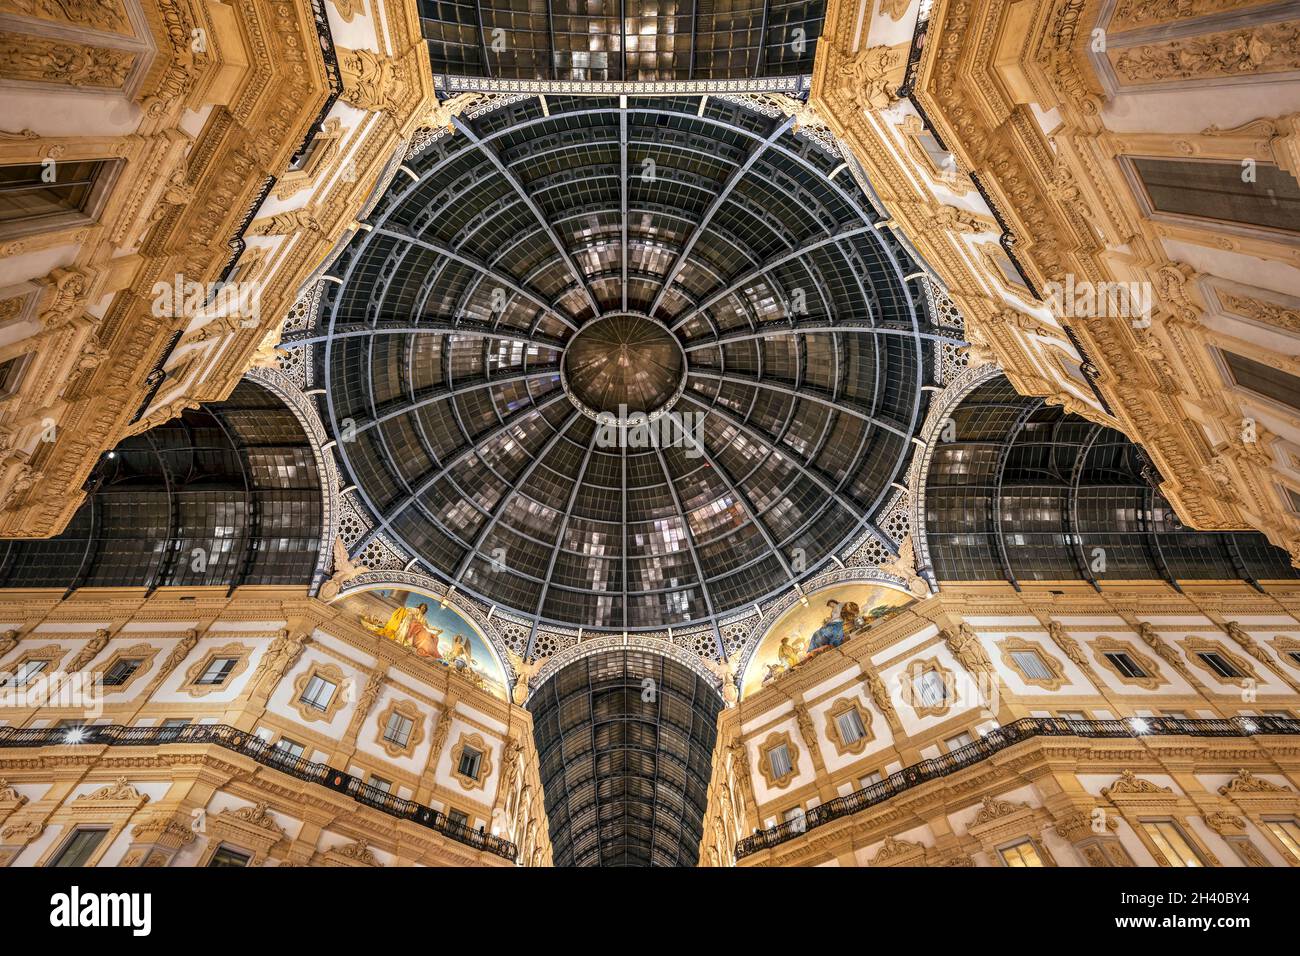 Night view of Galleria Vittorio Emanuele II shopping mall, Milan, Lombardy, Italy Stock Photo